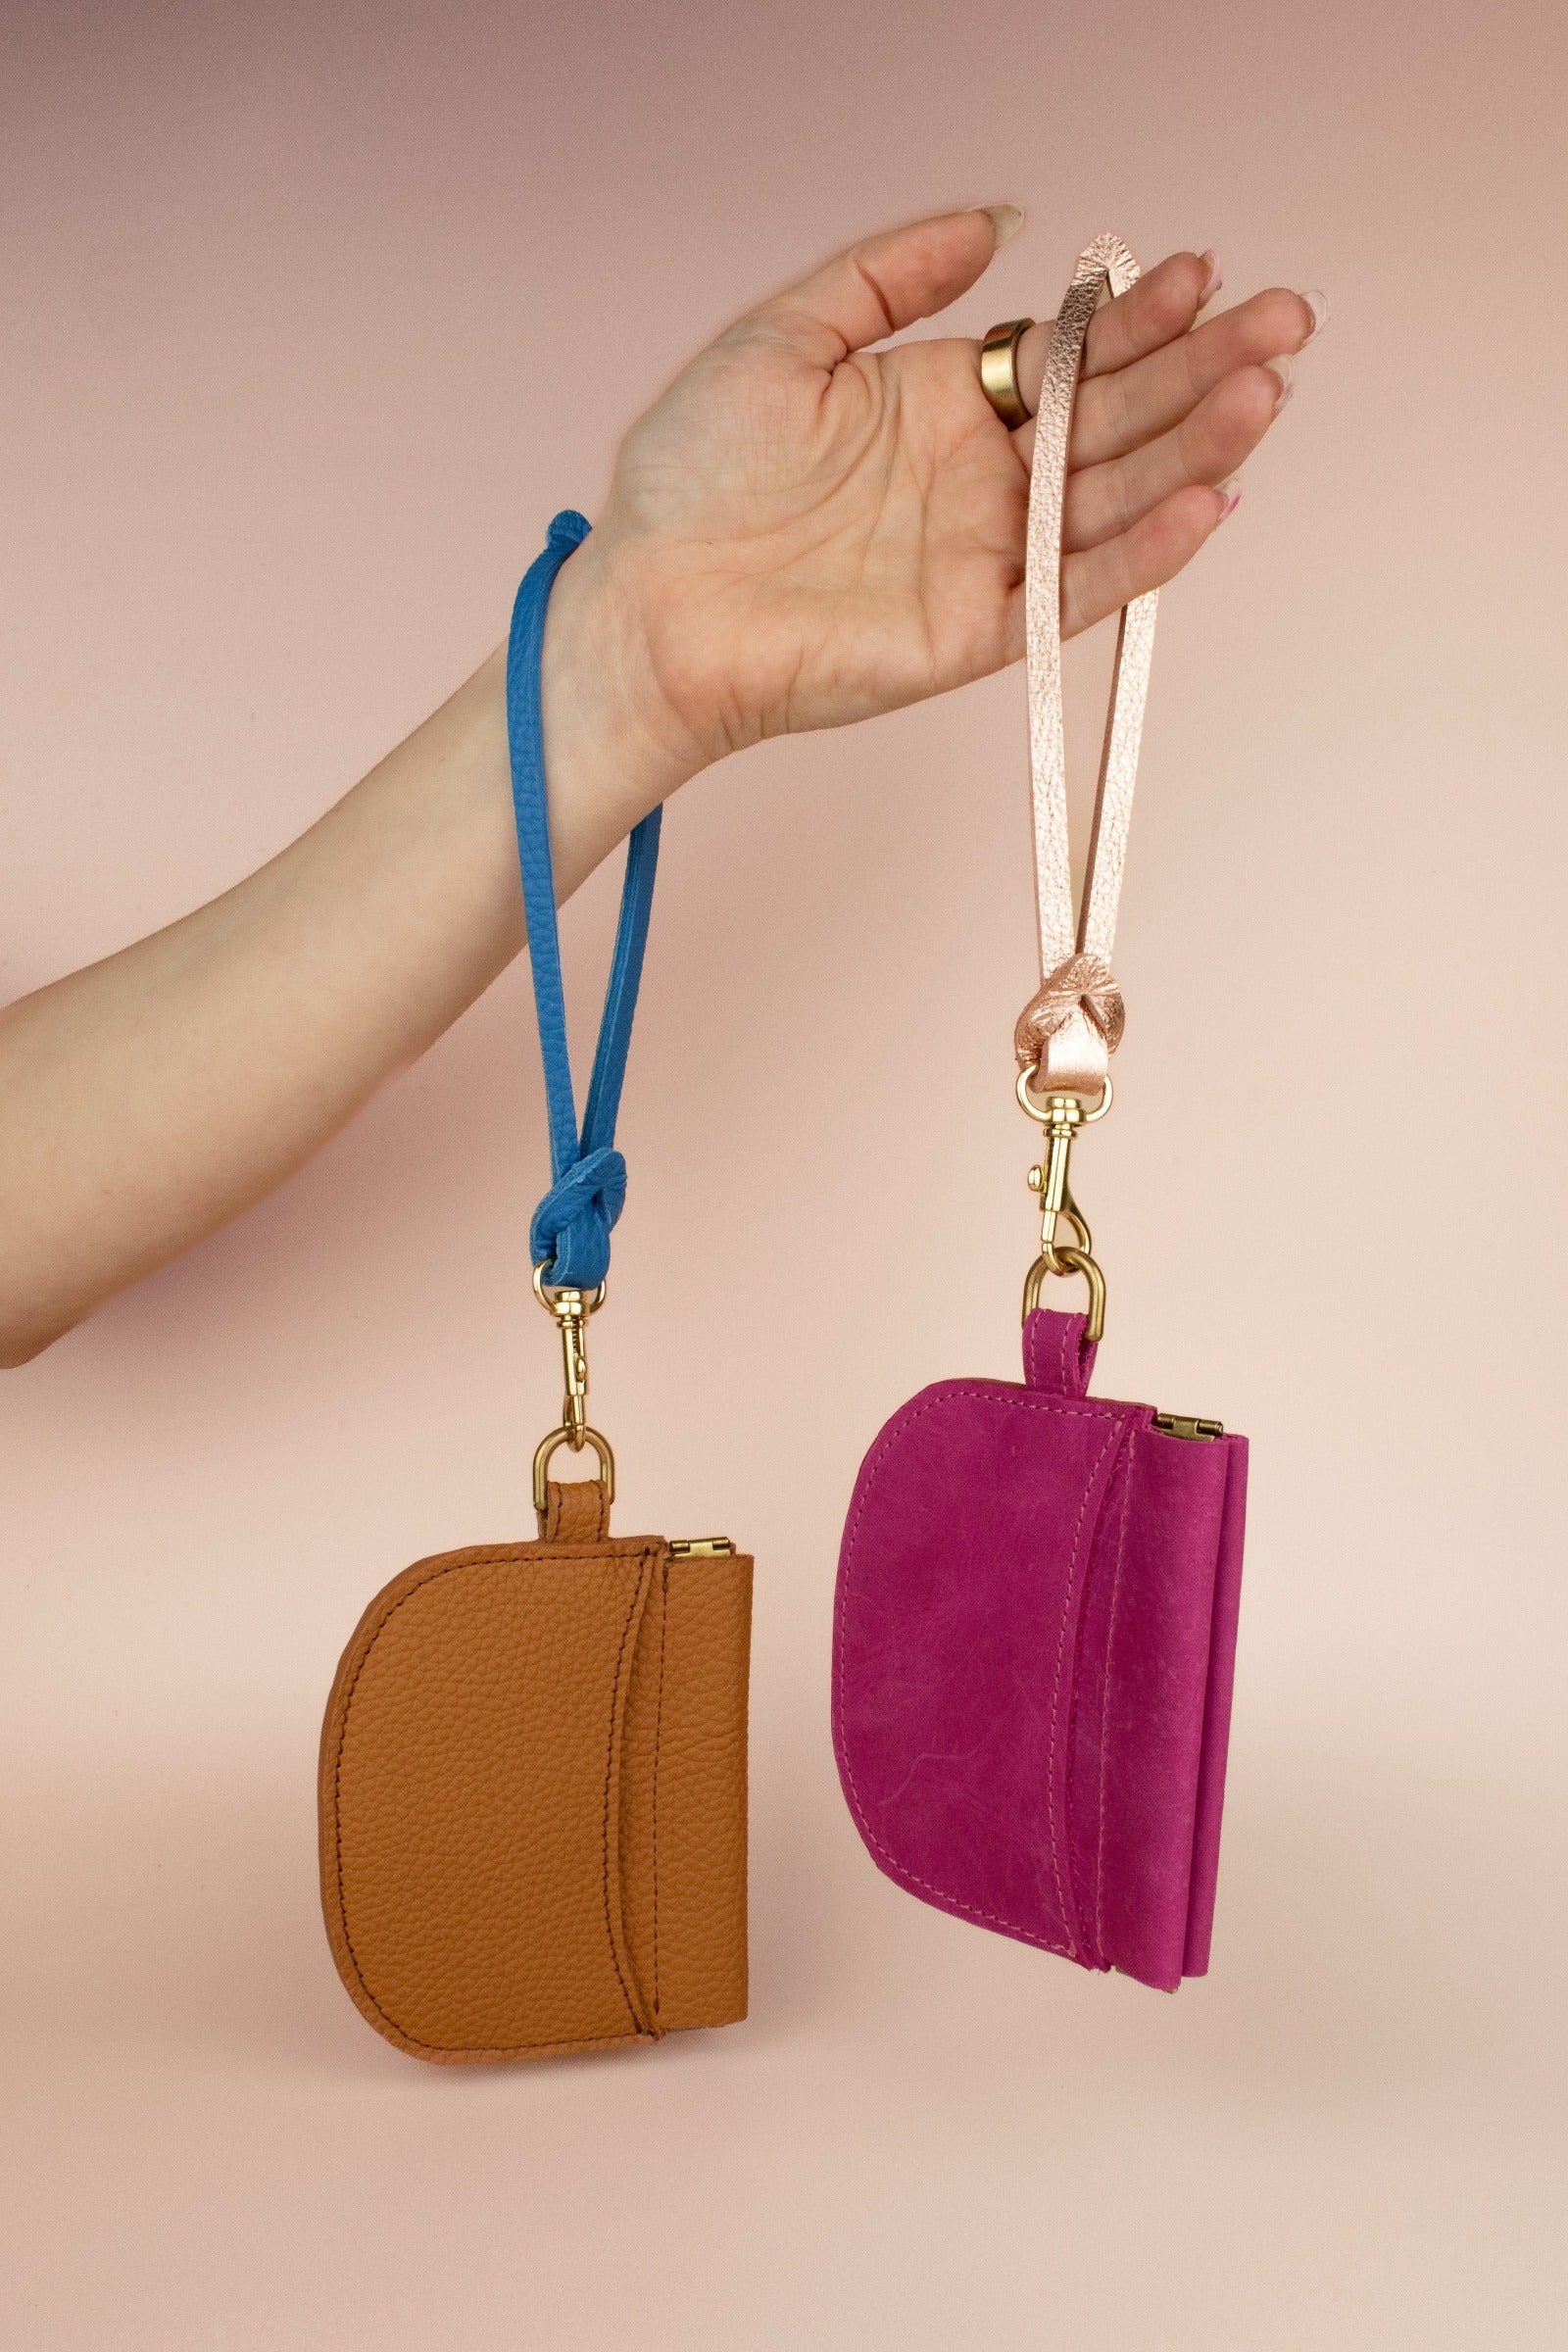 hand displaying two leather card case wristlets: magenta pink and caramel brown